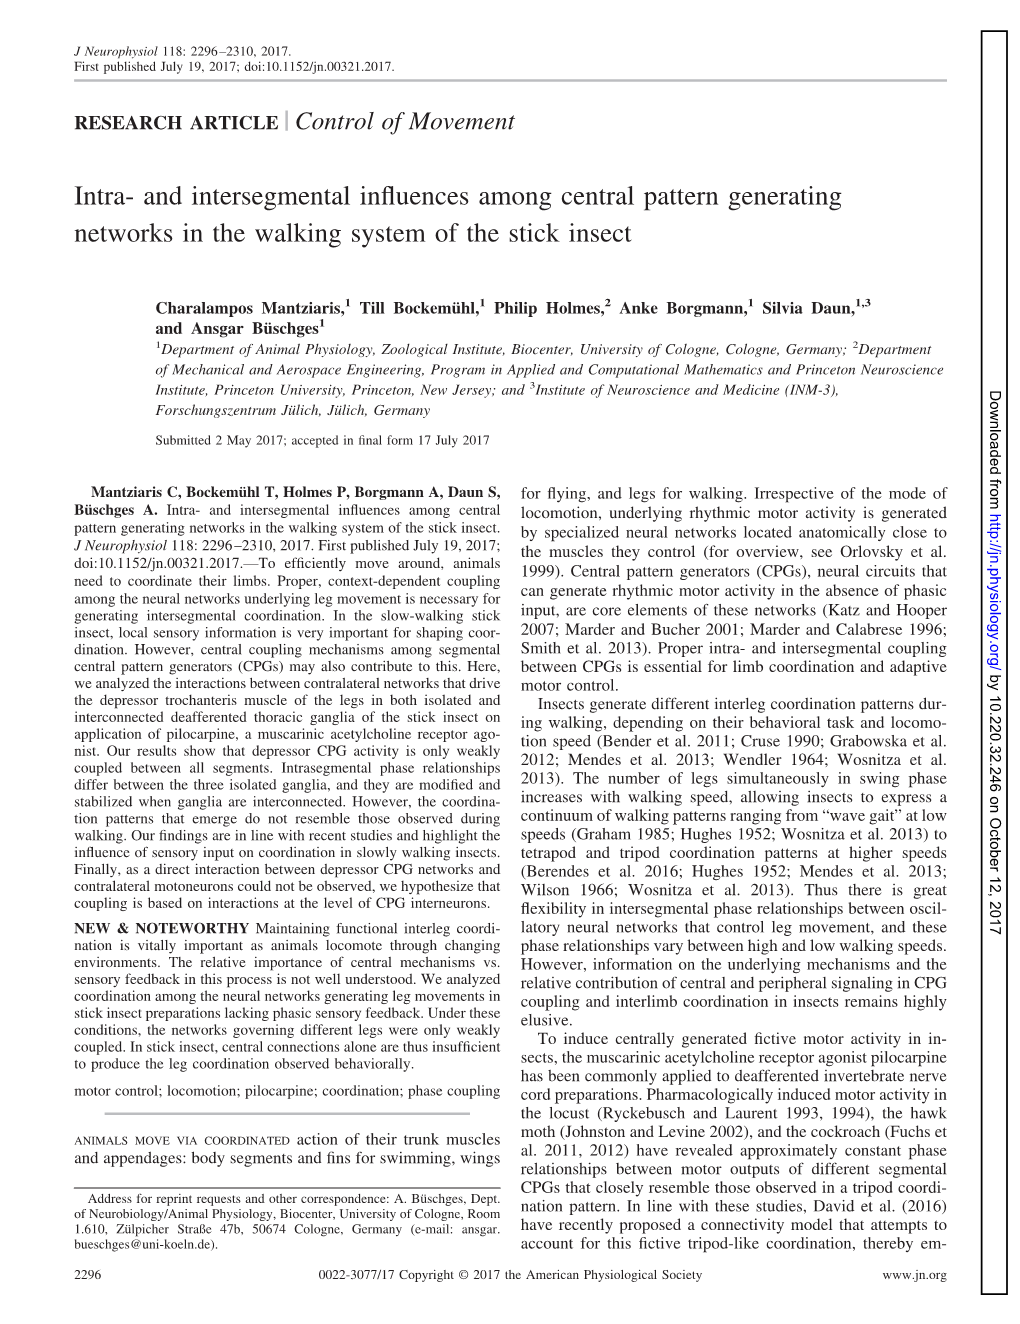 Intra- and Intersegmental Influences Among Central Pattern Generating Networks in the Walking System of the Stick Insect